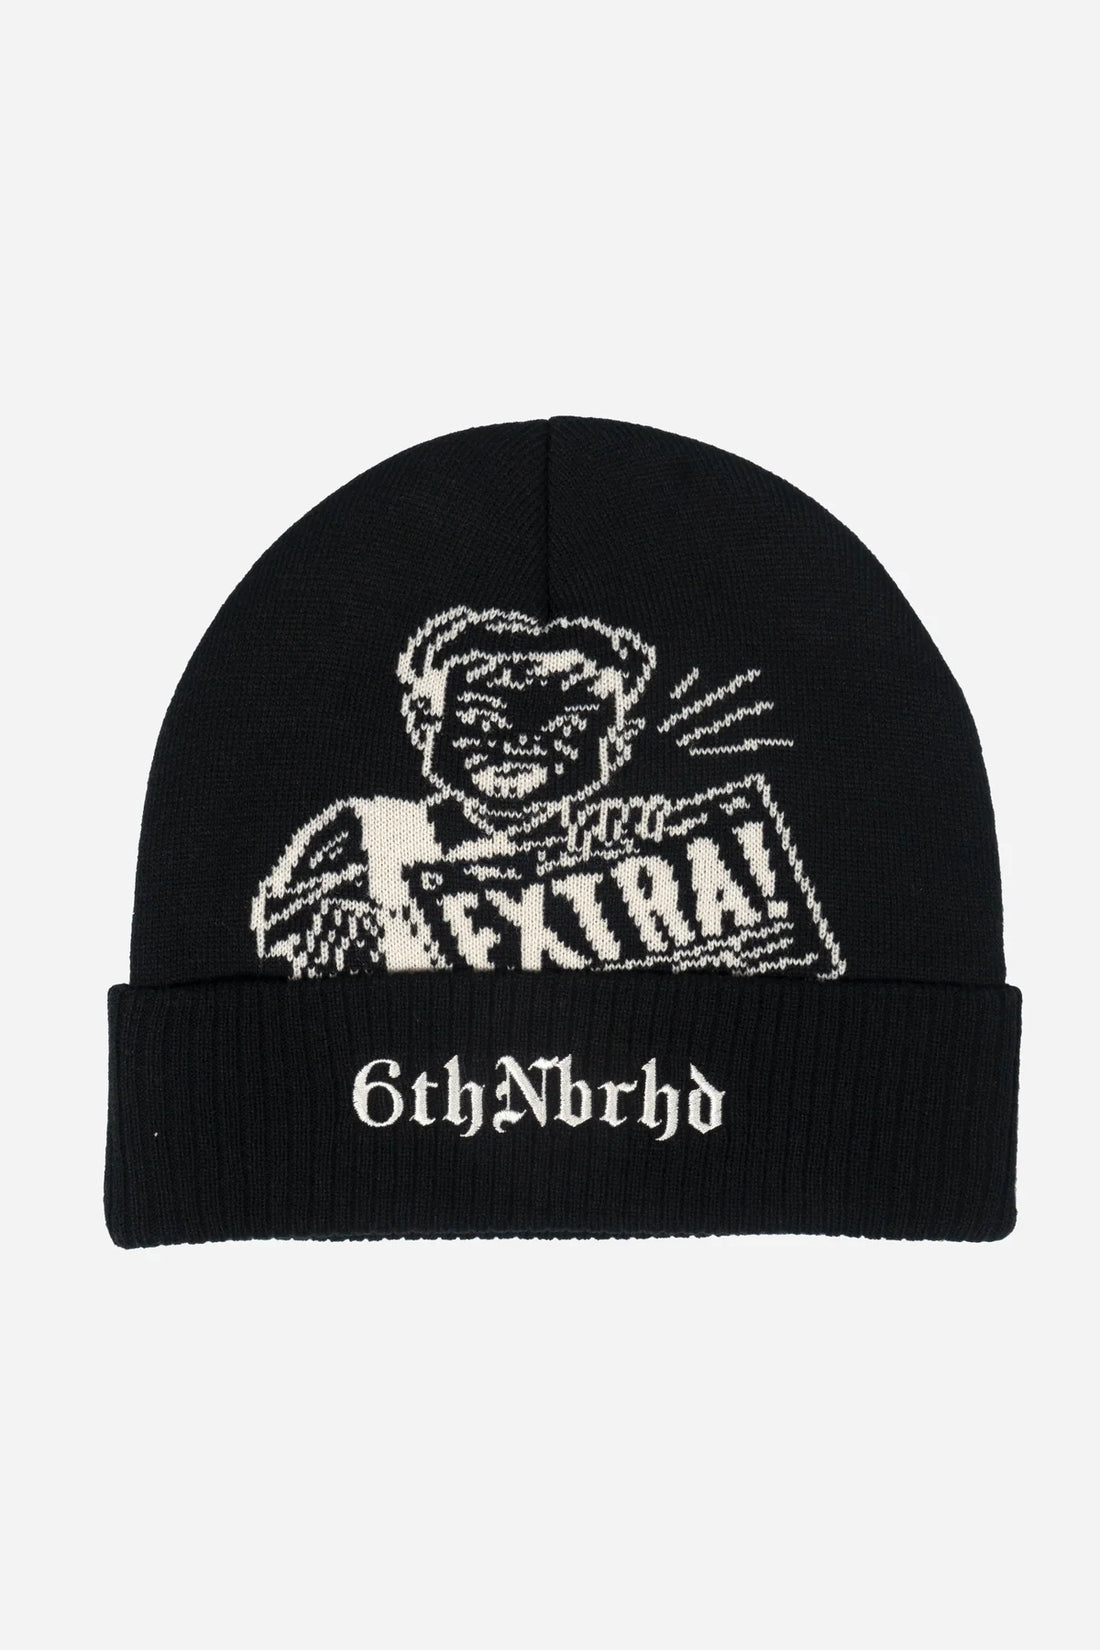 6thNbrhd "FRONT PAGE" HEADWEAR (6TH-H1802)